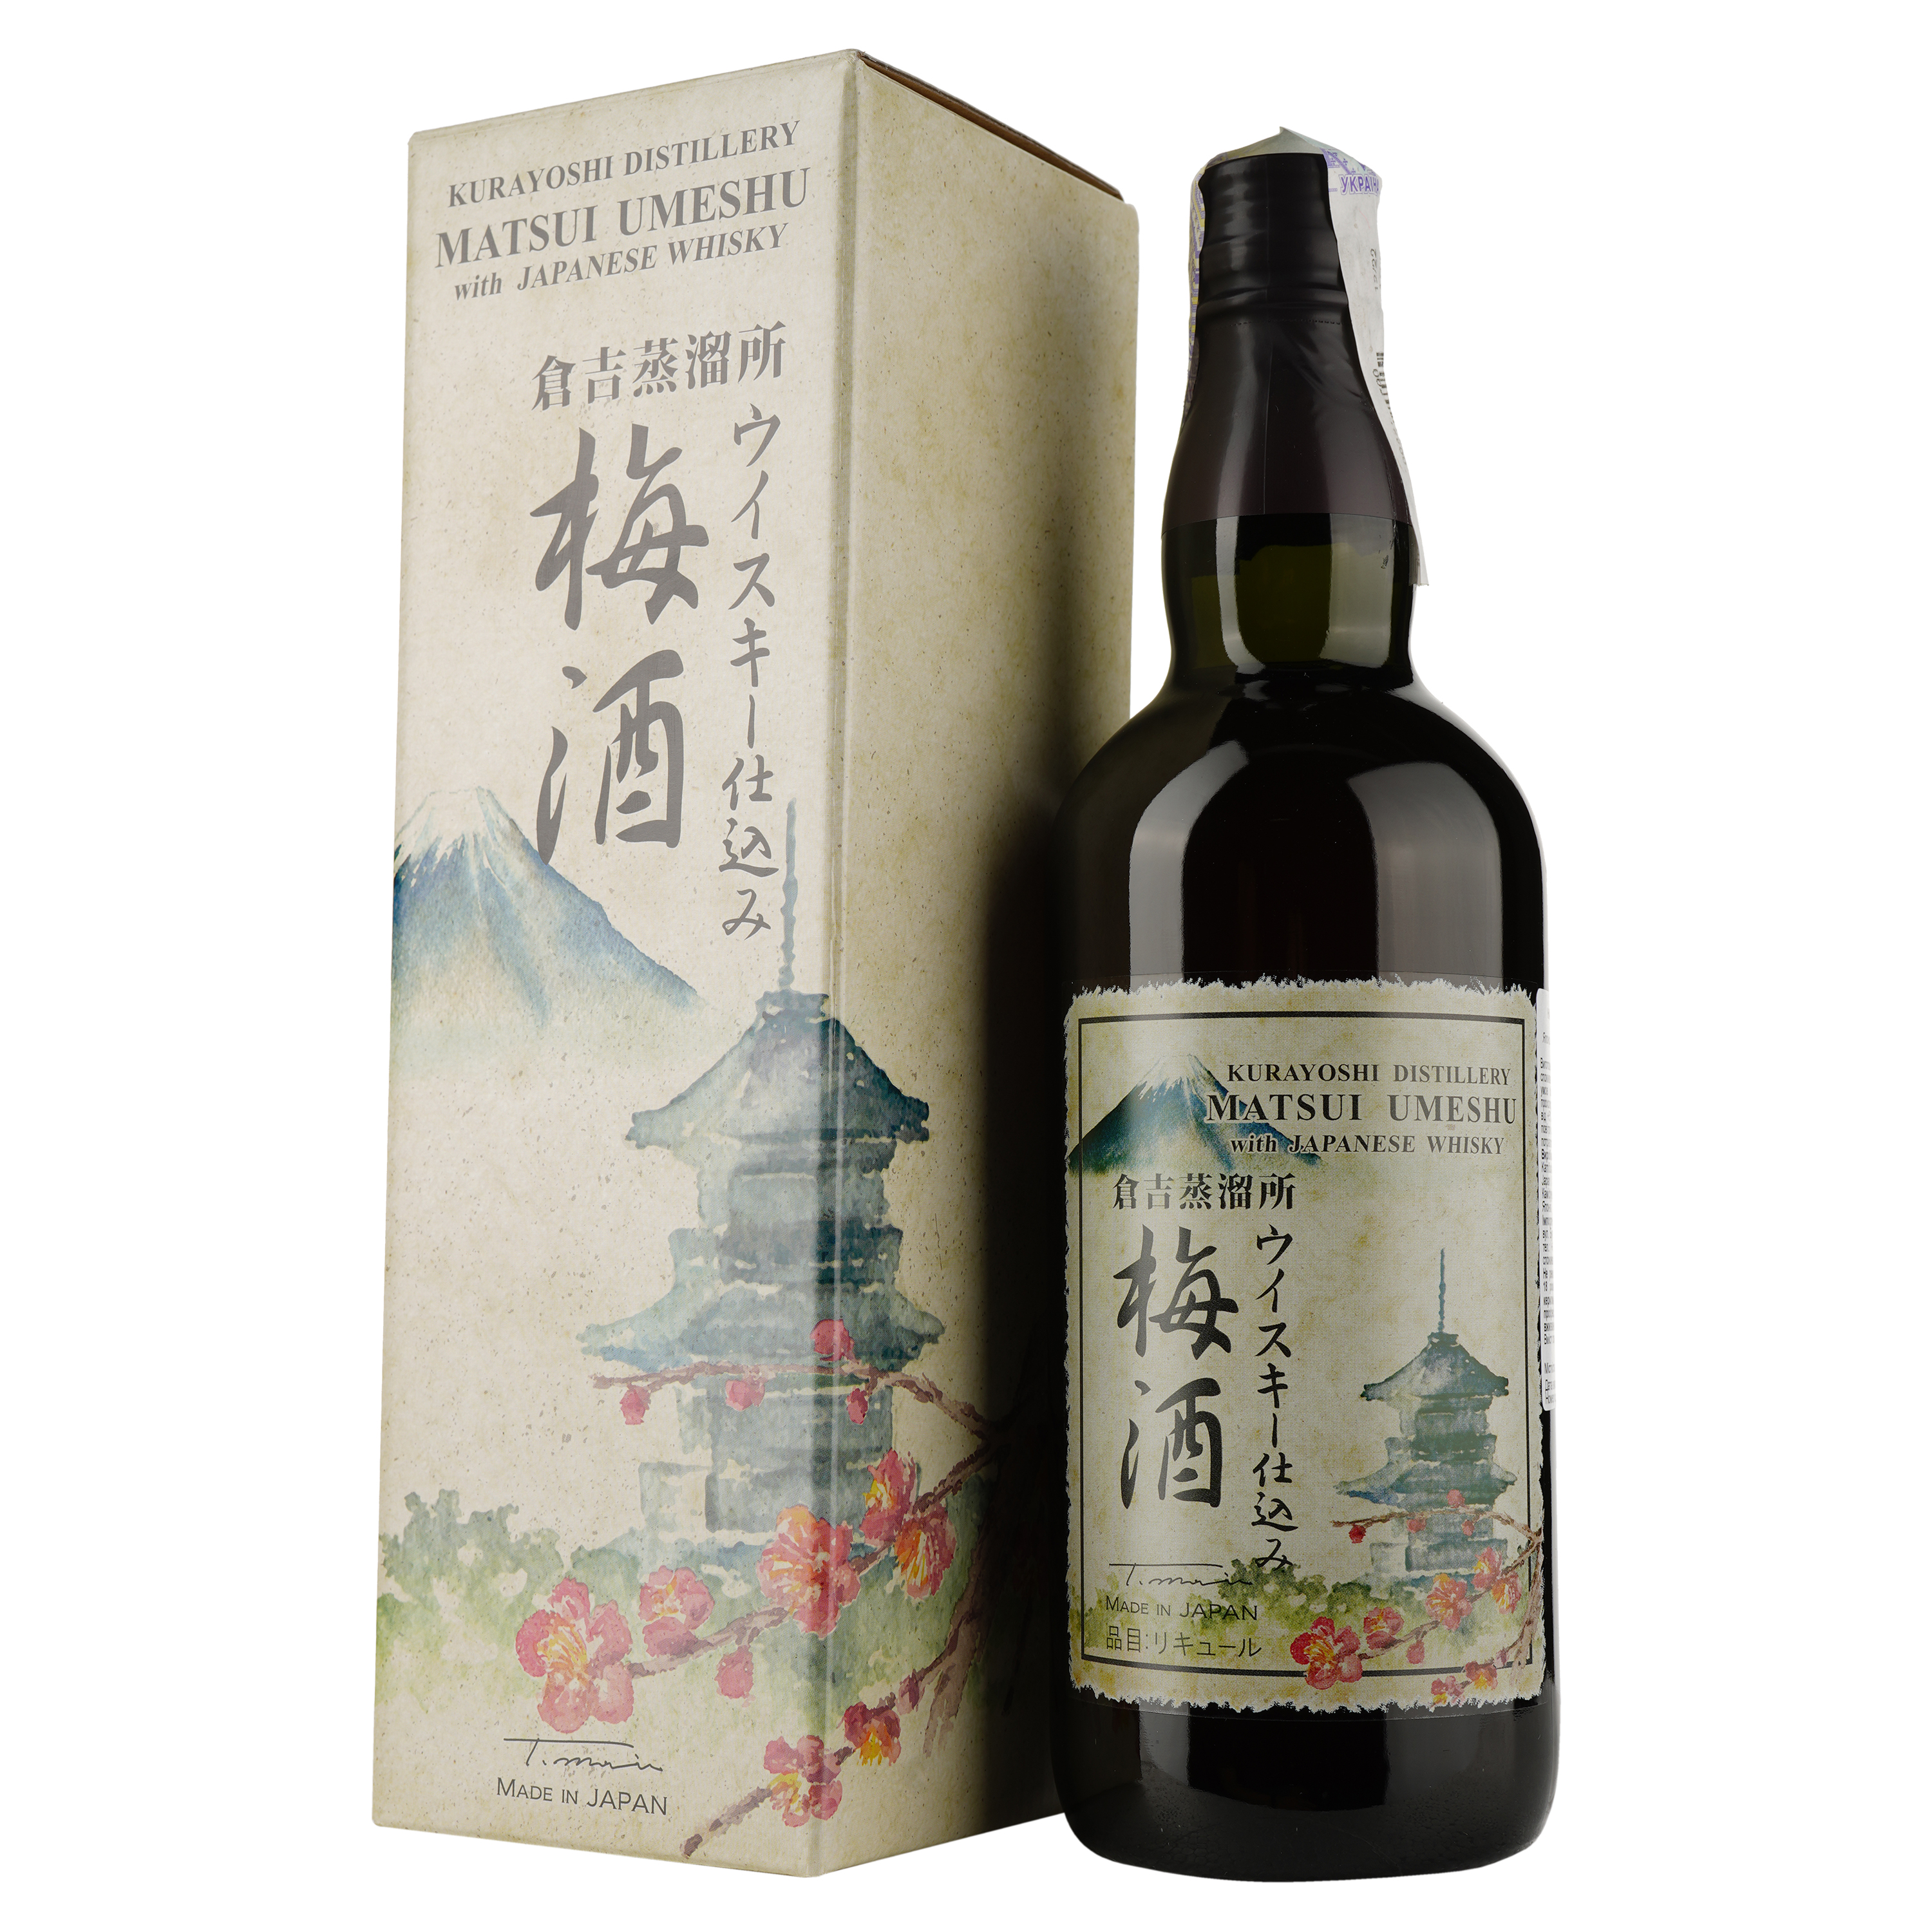 Ликер Matsui Umeshu Blended with Japanese Whisky 14% 0.7 л - фото 1